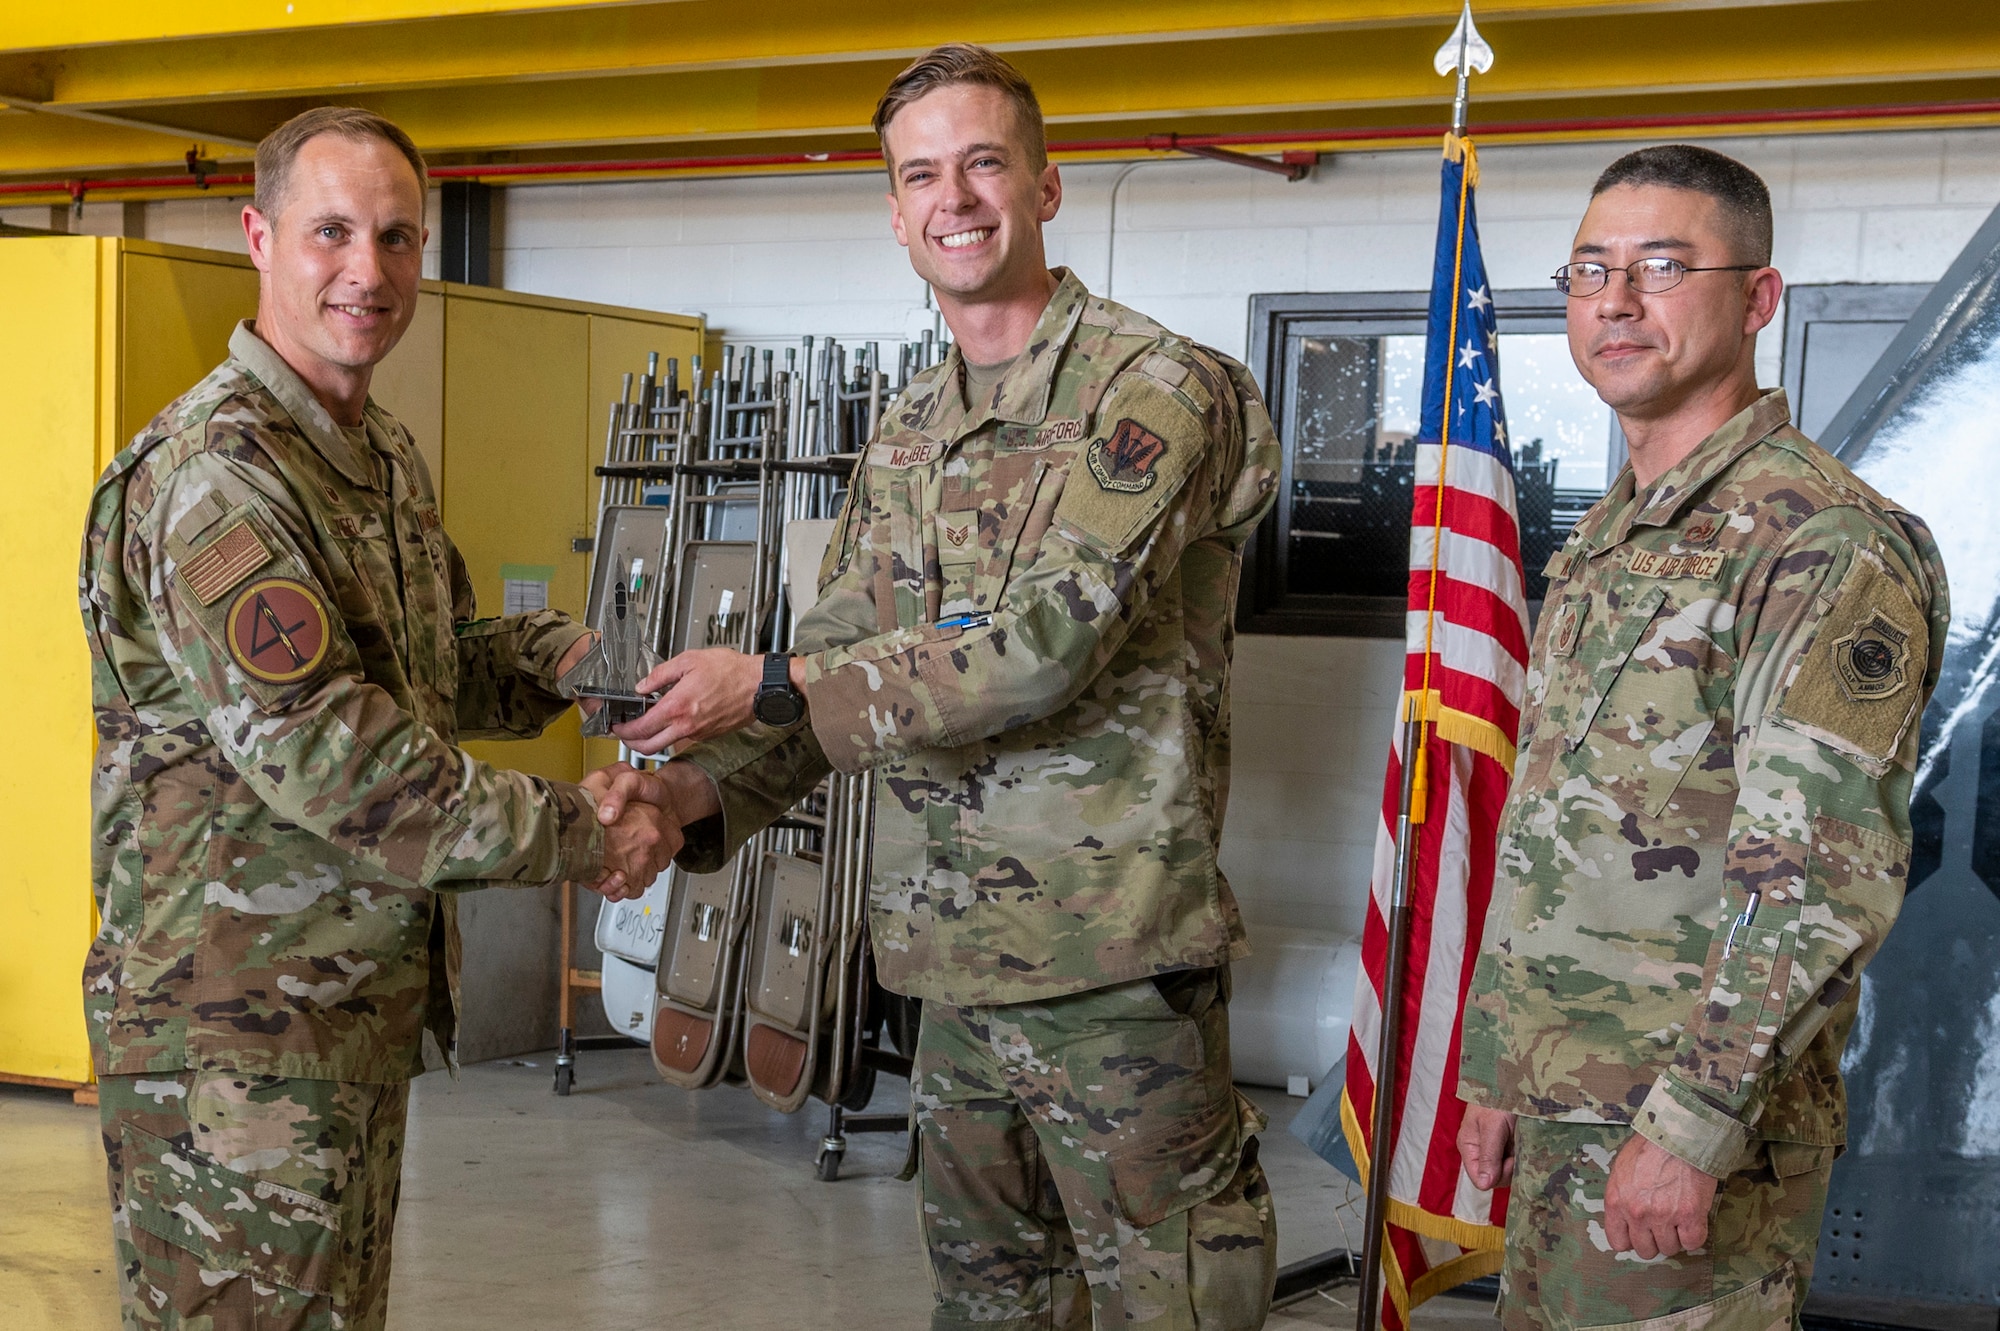 McAbee was named the non-commissioned officer of the 1st quarter for 2022. (U.S. Air Force photo by Senior Airman Kylie Barrow)